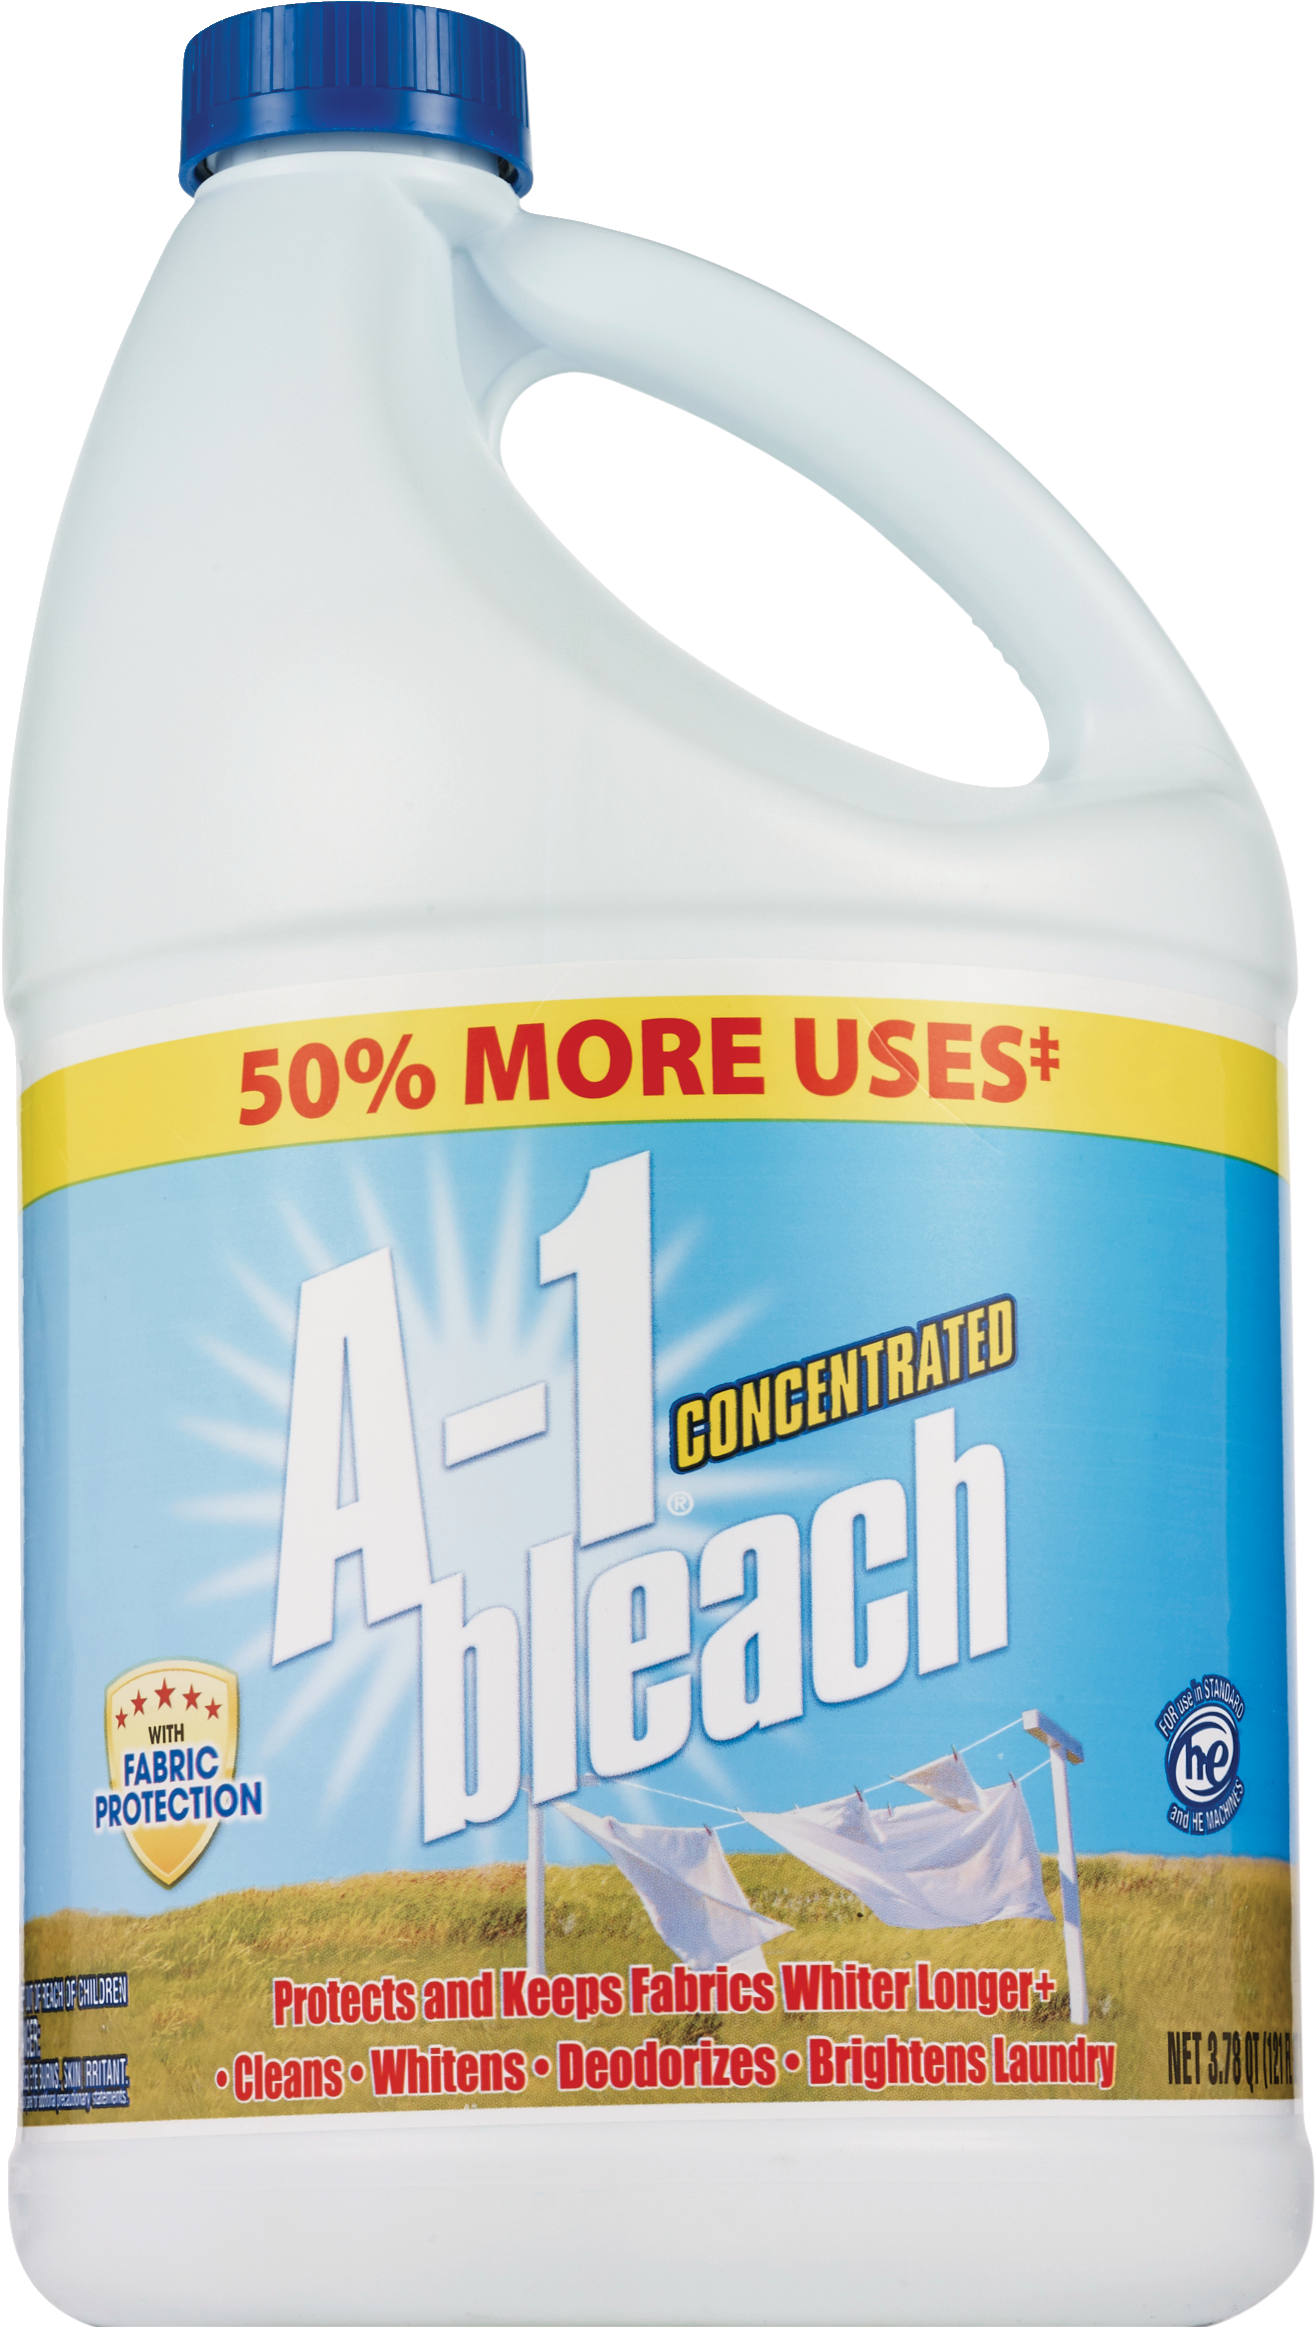 A-1 Concentrated Bleach, 121 oz